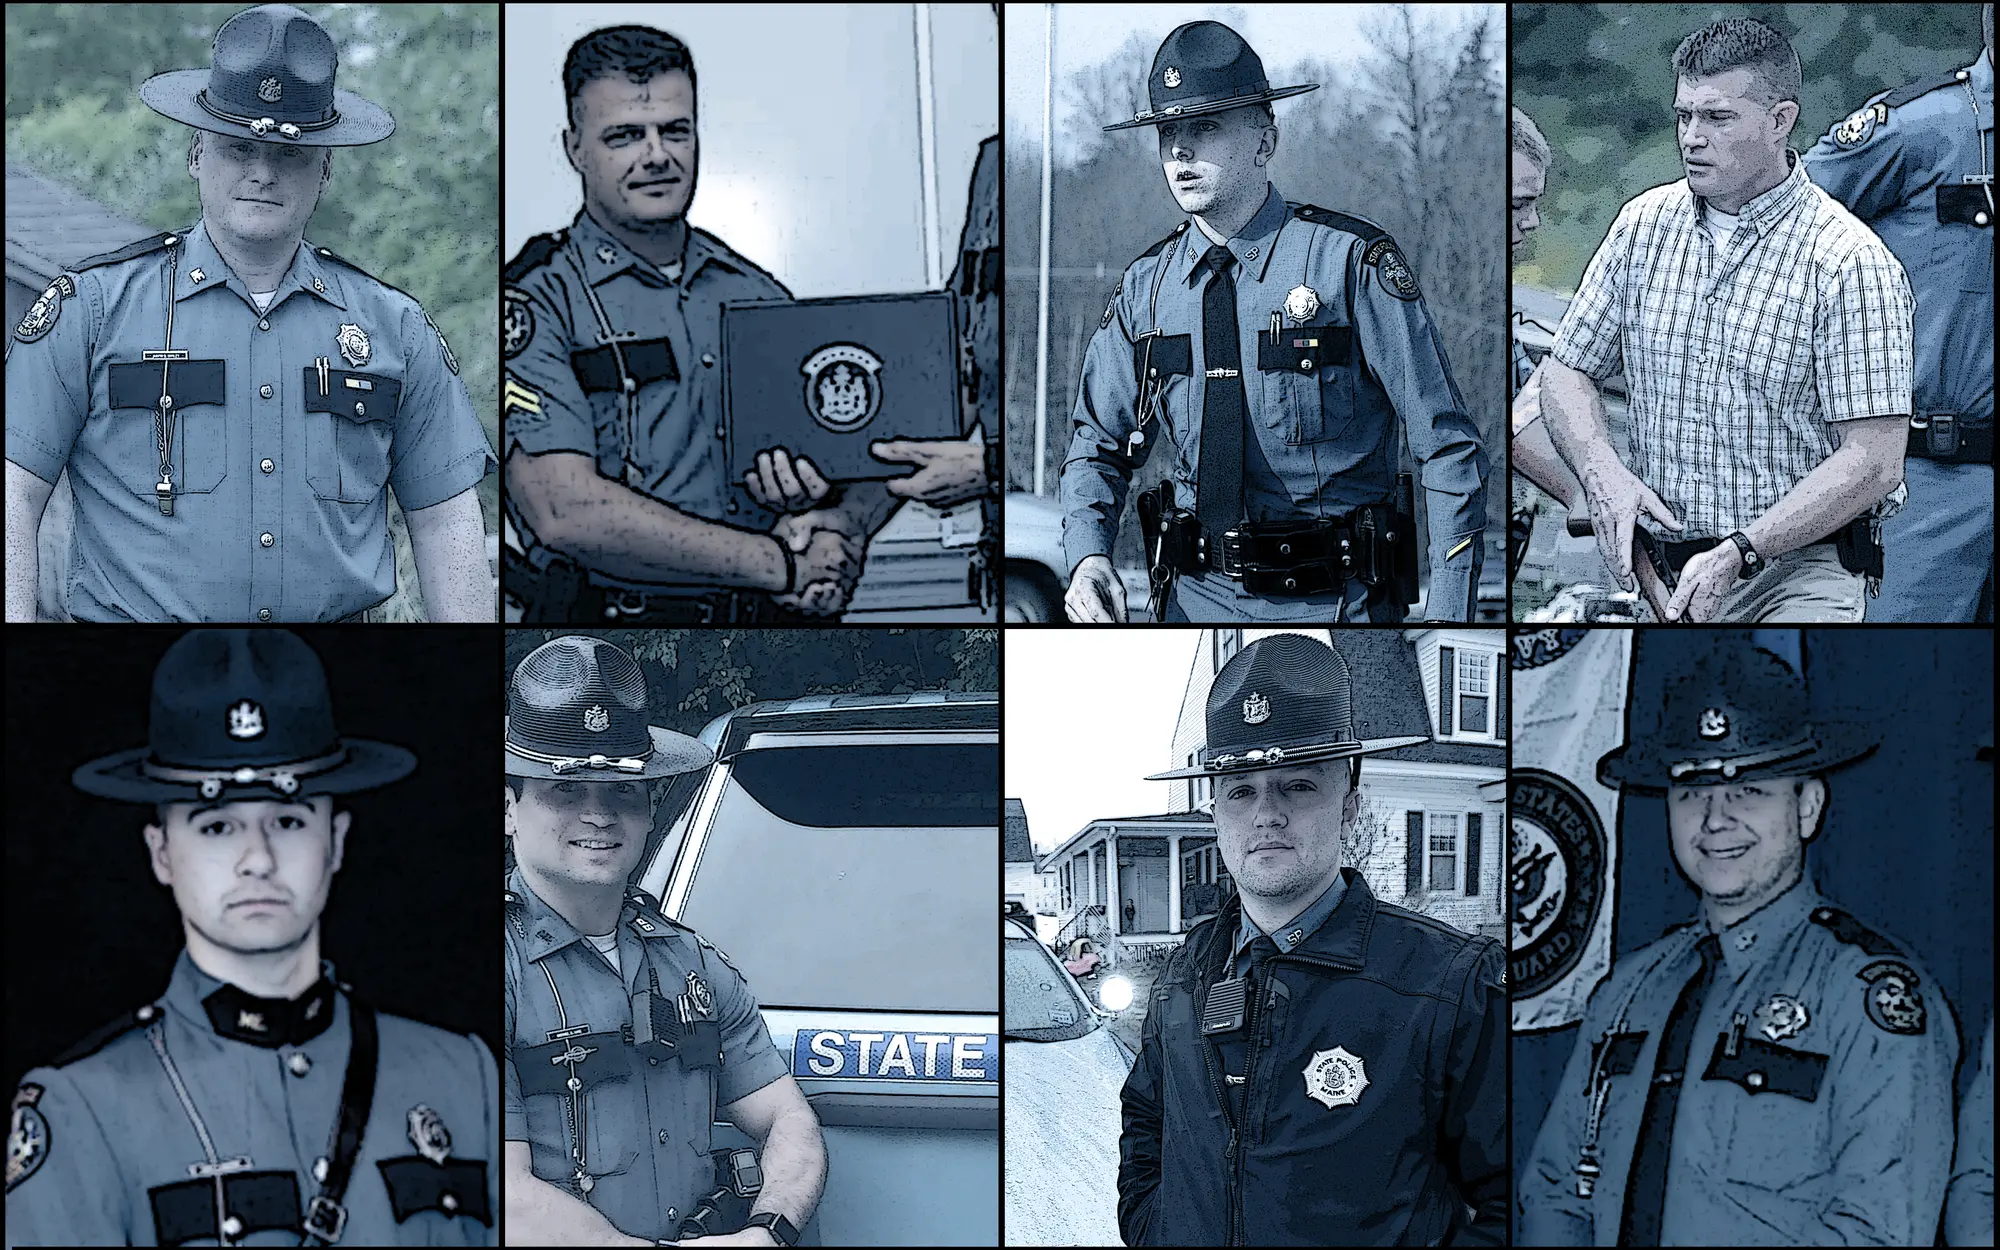 Collage of photos of police officers.